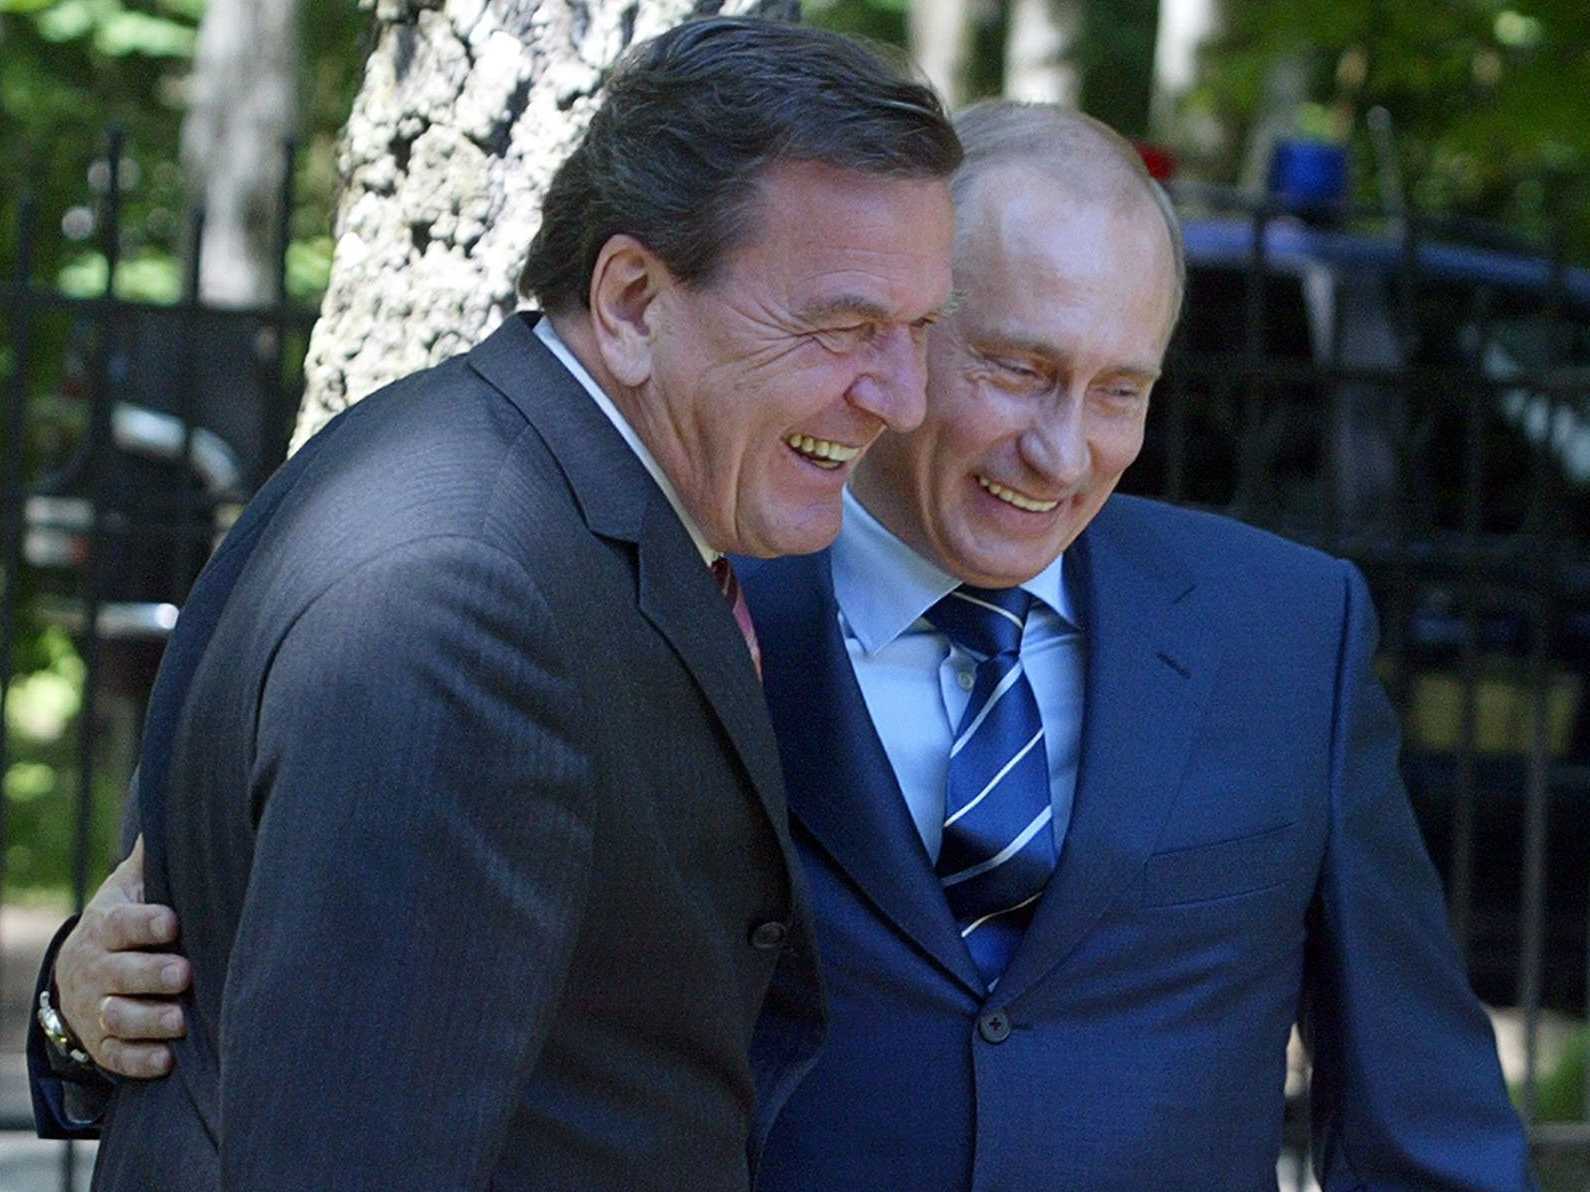 Gerhard Schröder, former Chancellor of Germany (1988-2005) who became top GAZPROM representative in the country after leaving his government position, with Vladimir Putin